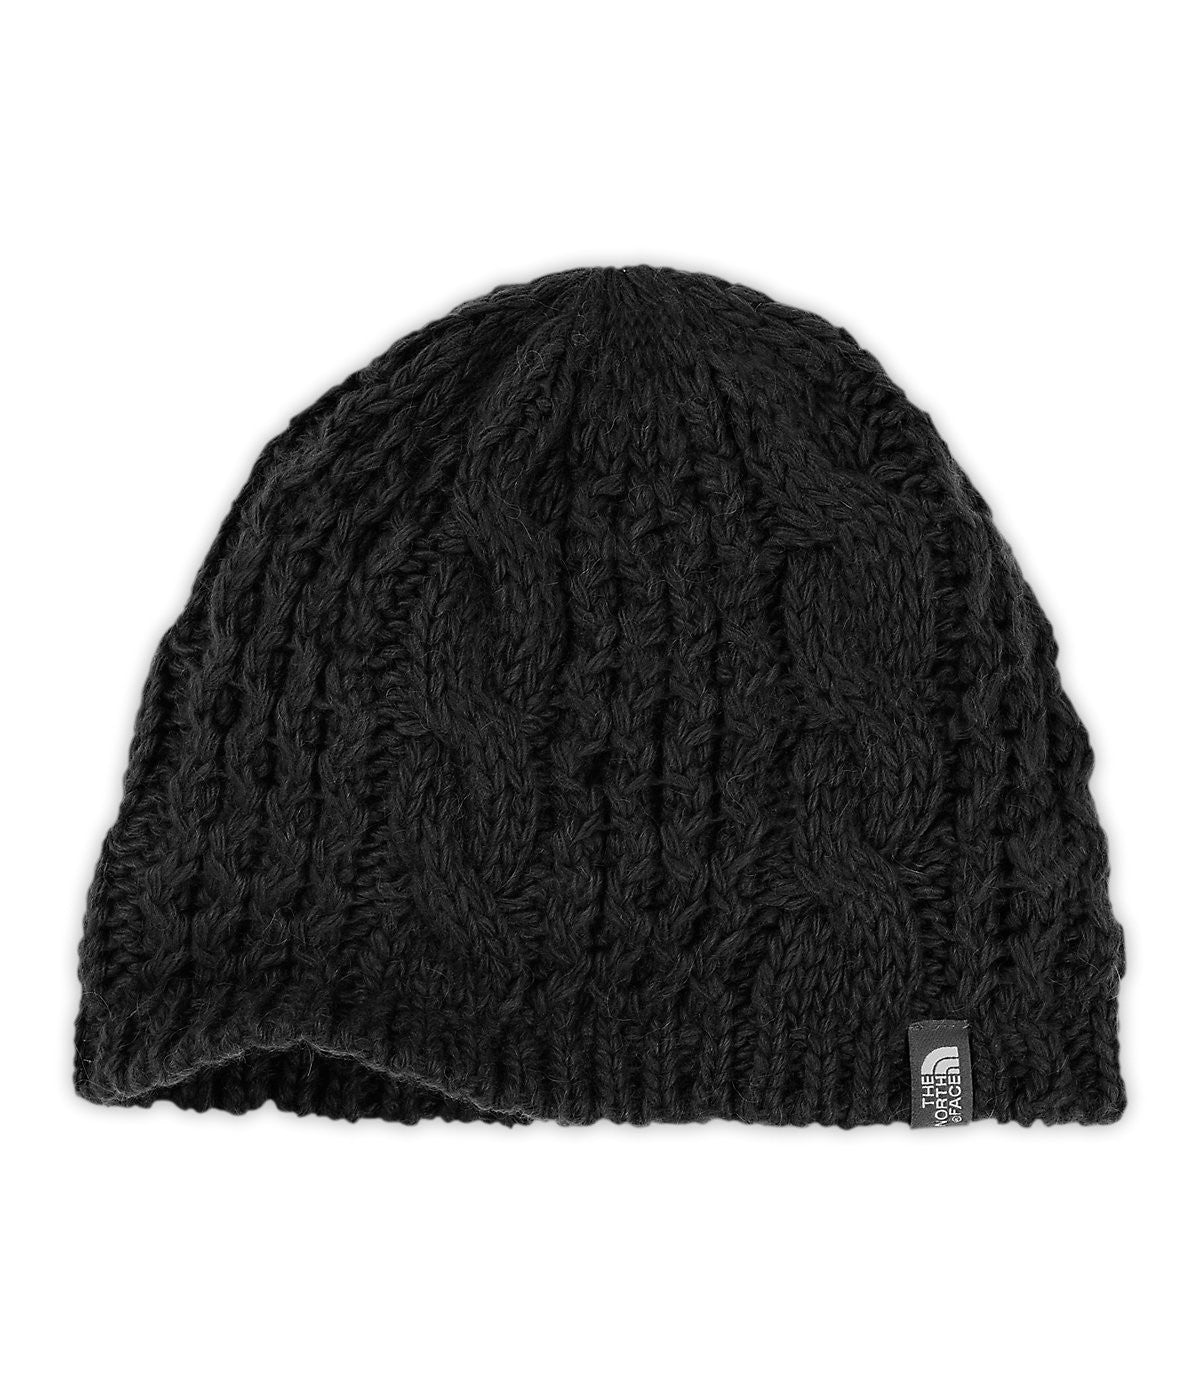 north face knit hat